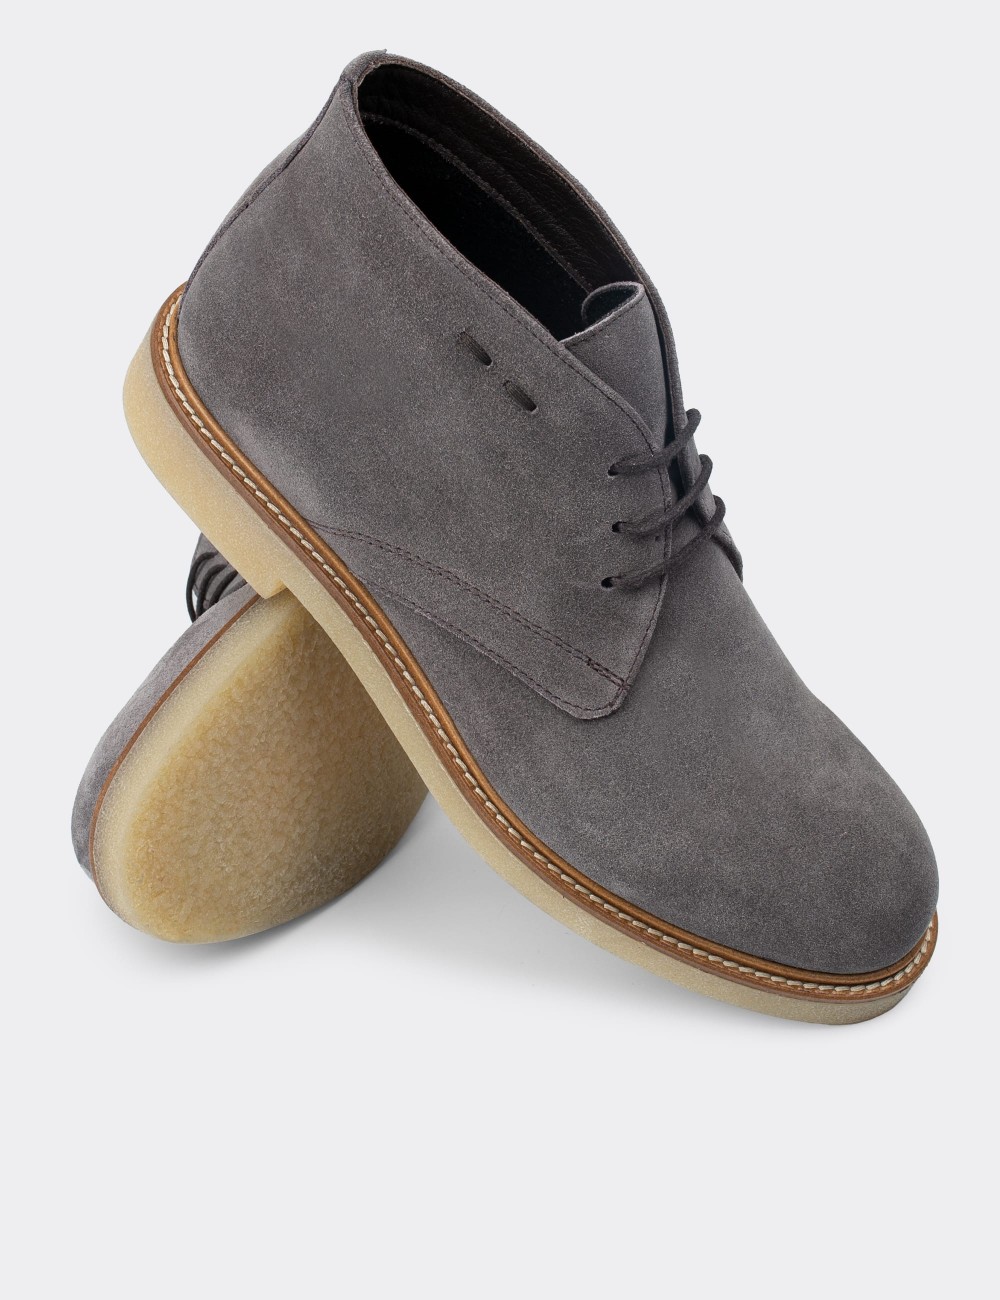 Gray Suede Leather Boots - 01295MGRIC06